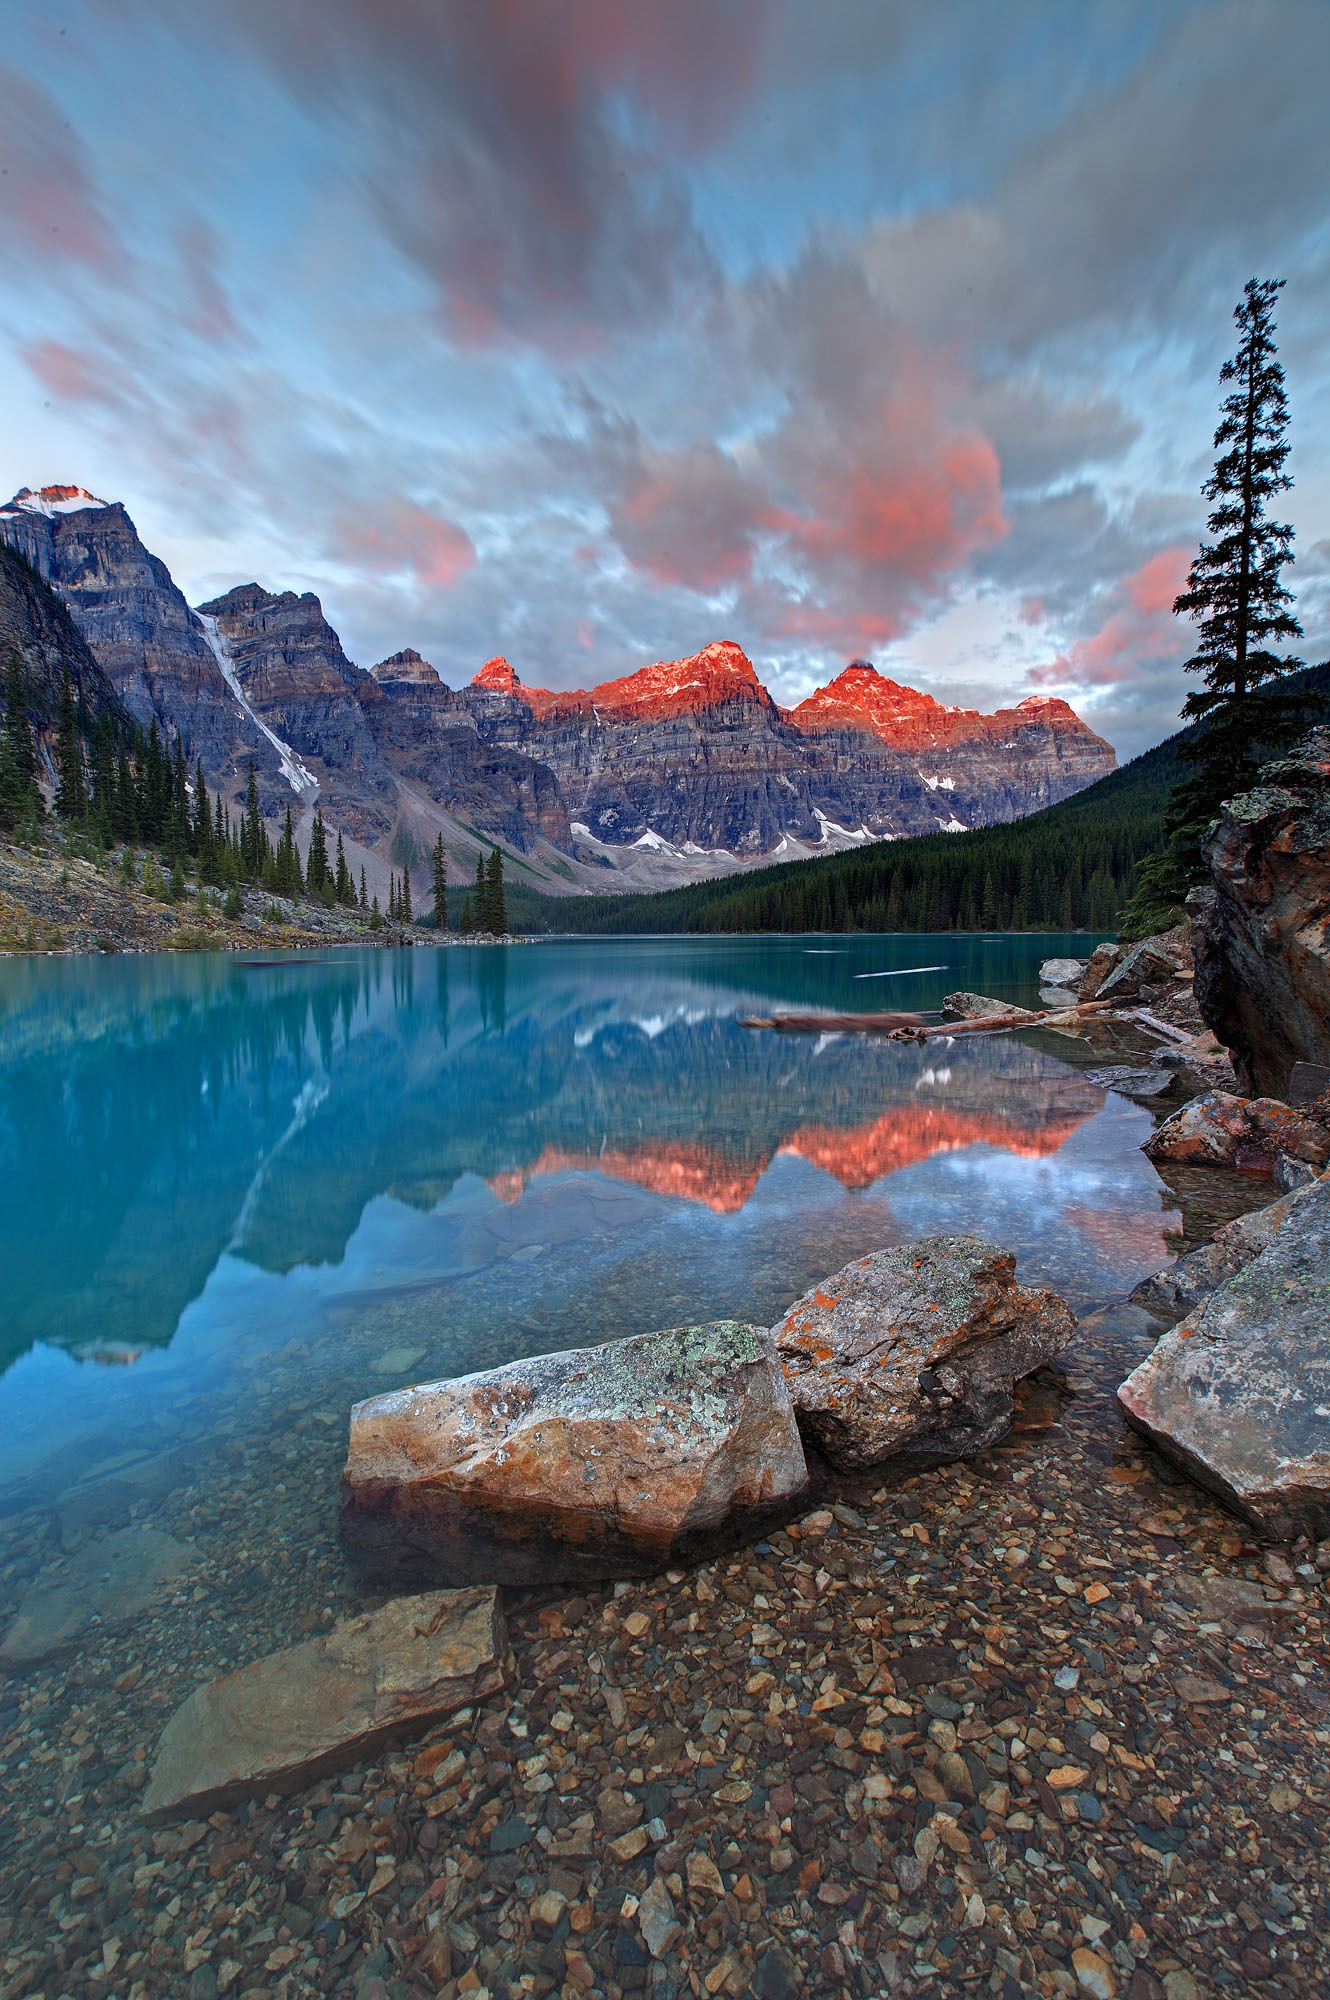 Alpenglow sunrise at Moraine Lake in the Valley of the Ten Peaks in the Canadian Rocky Mountains near Banff